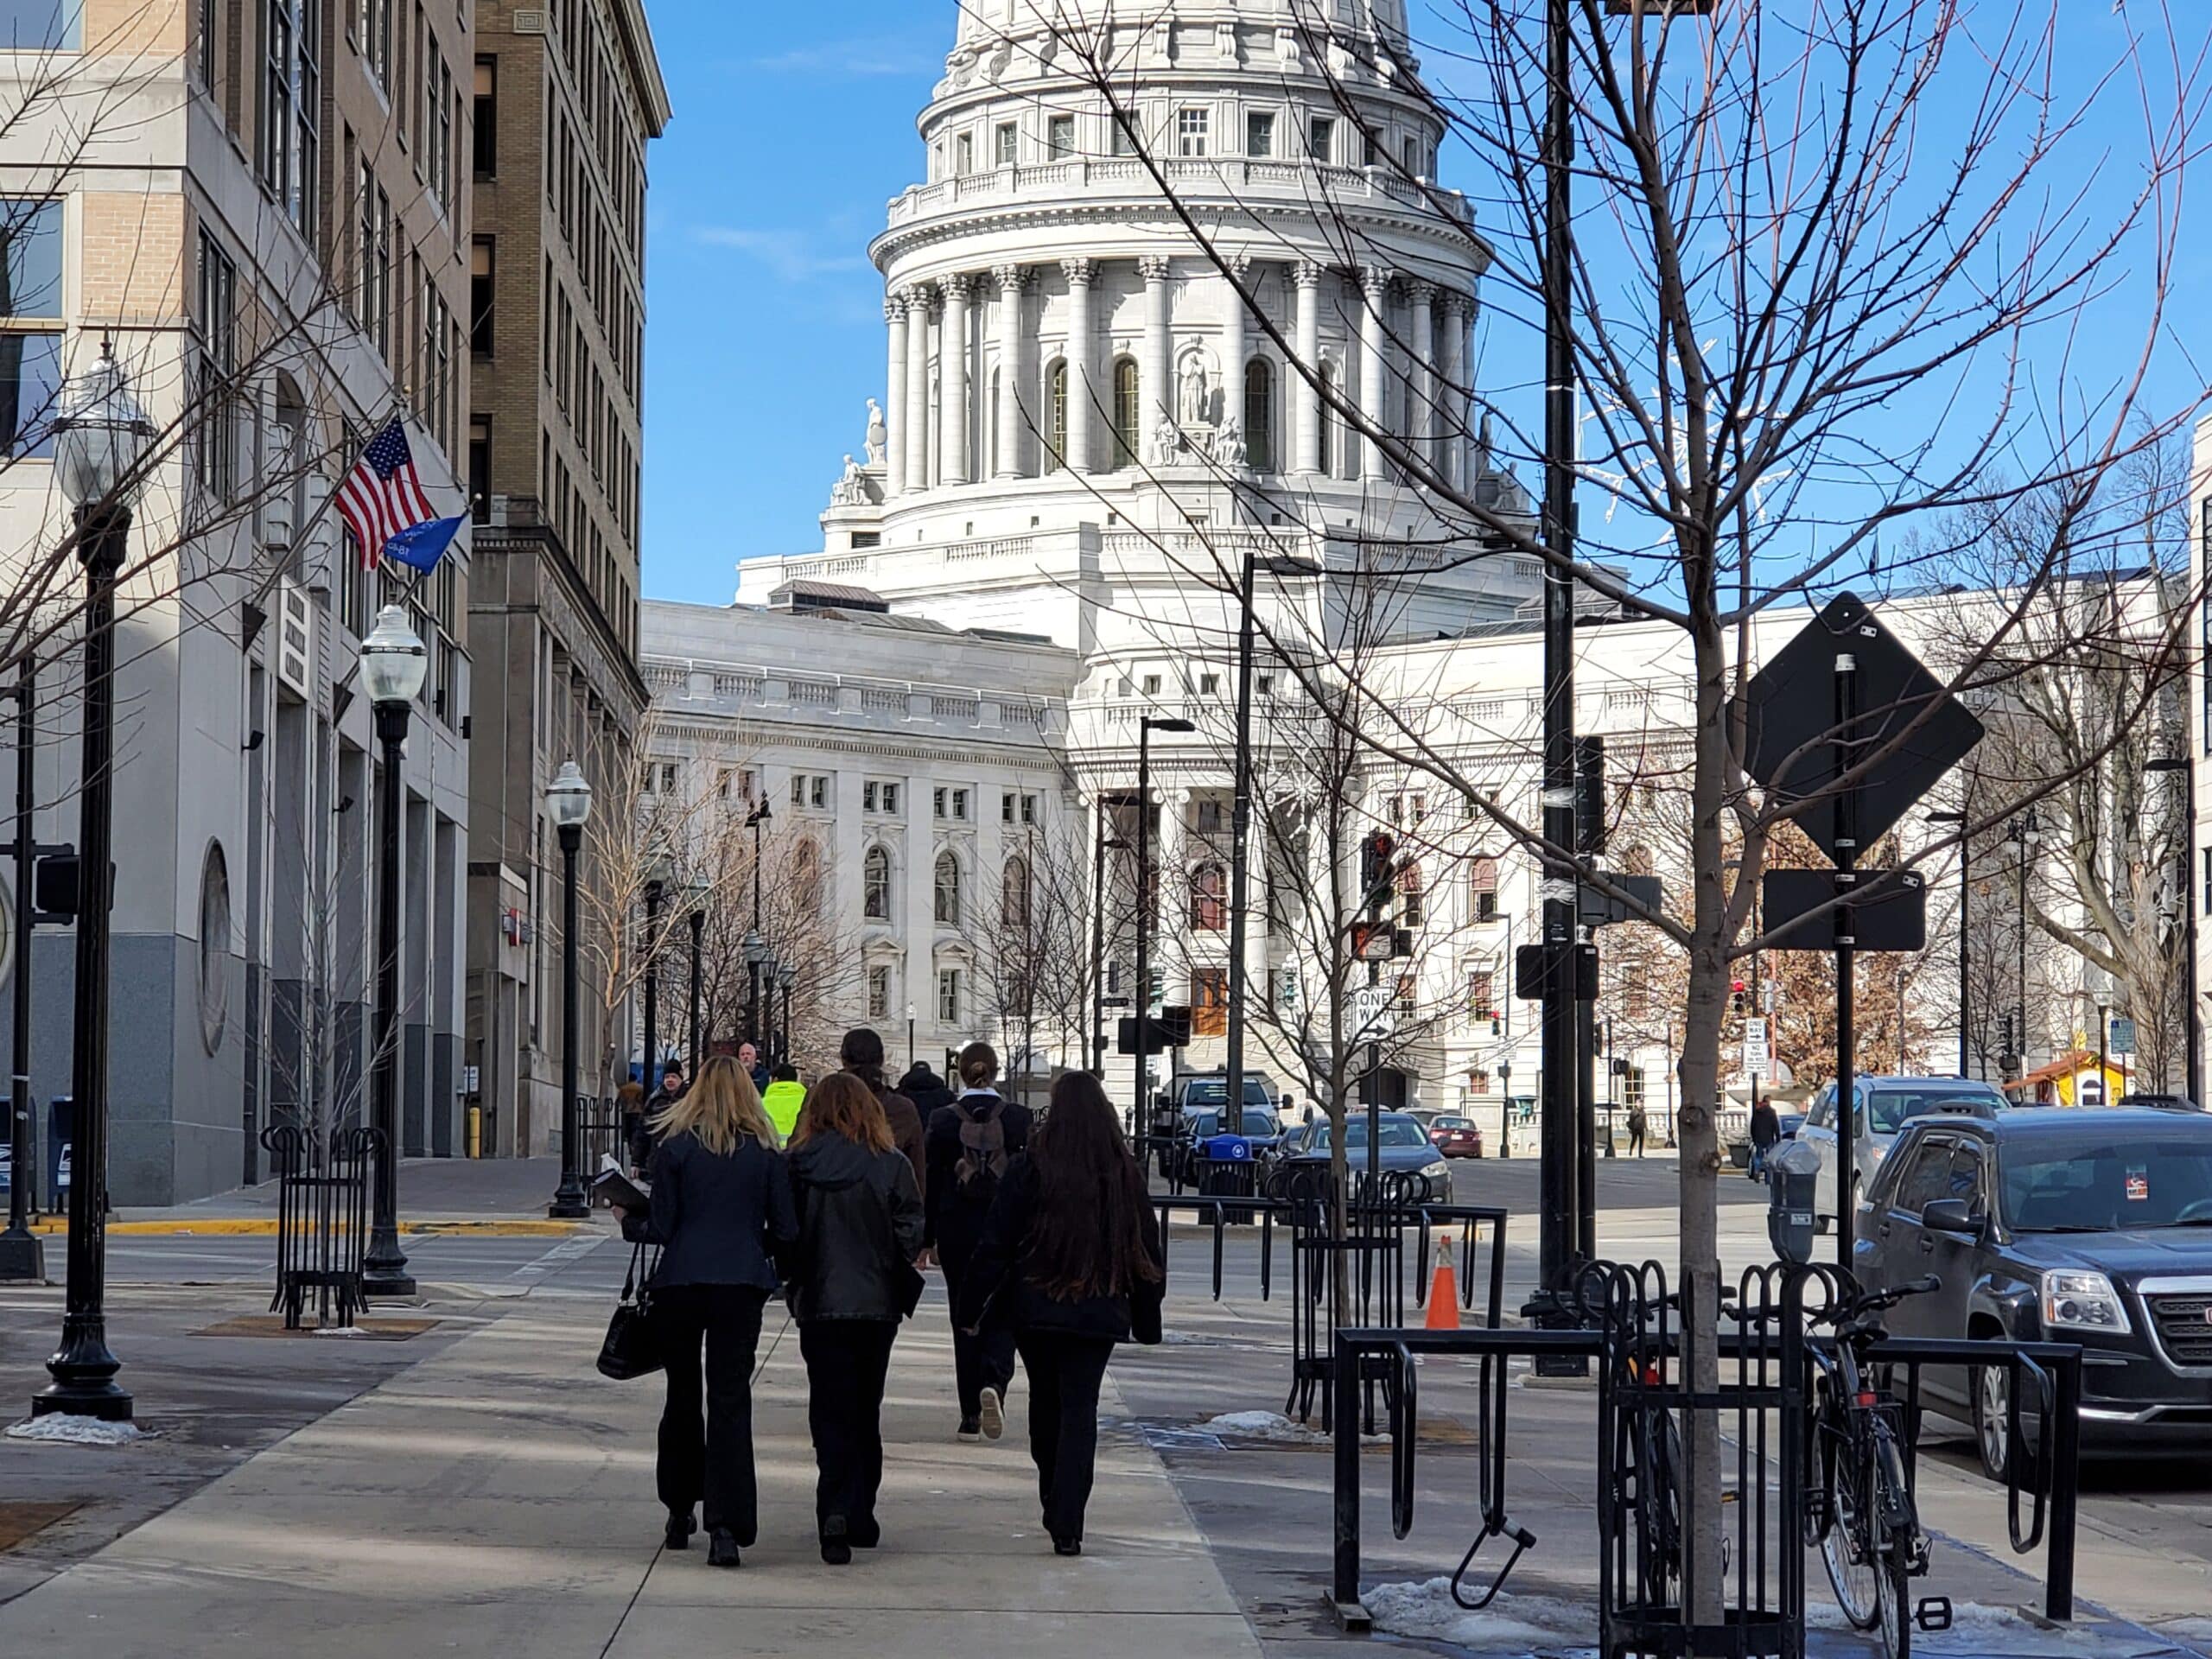 Walking to the Capitol